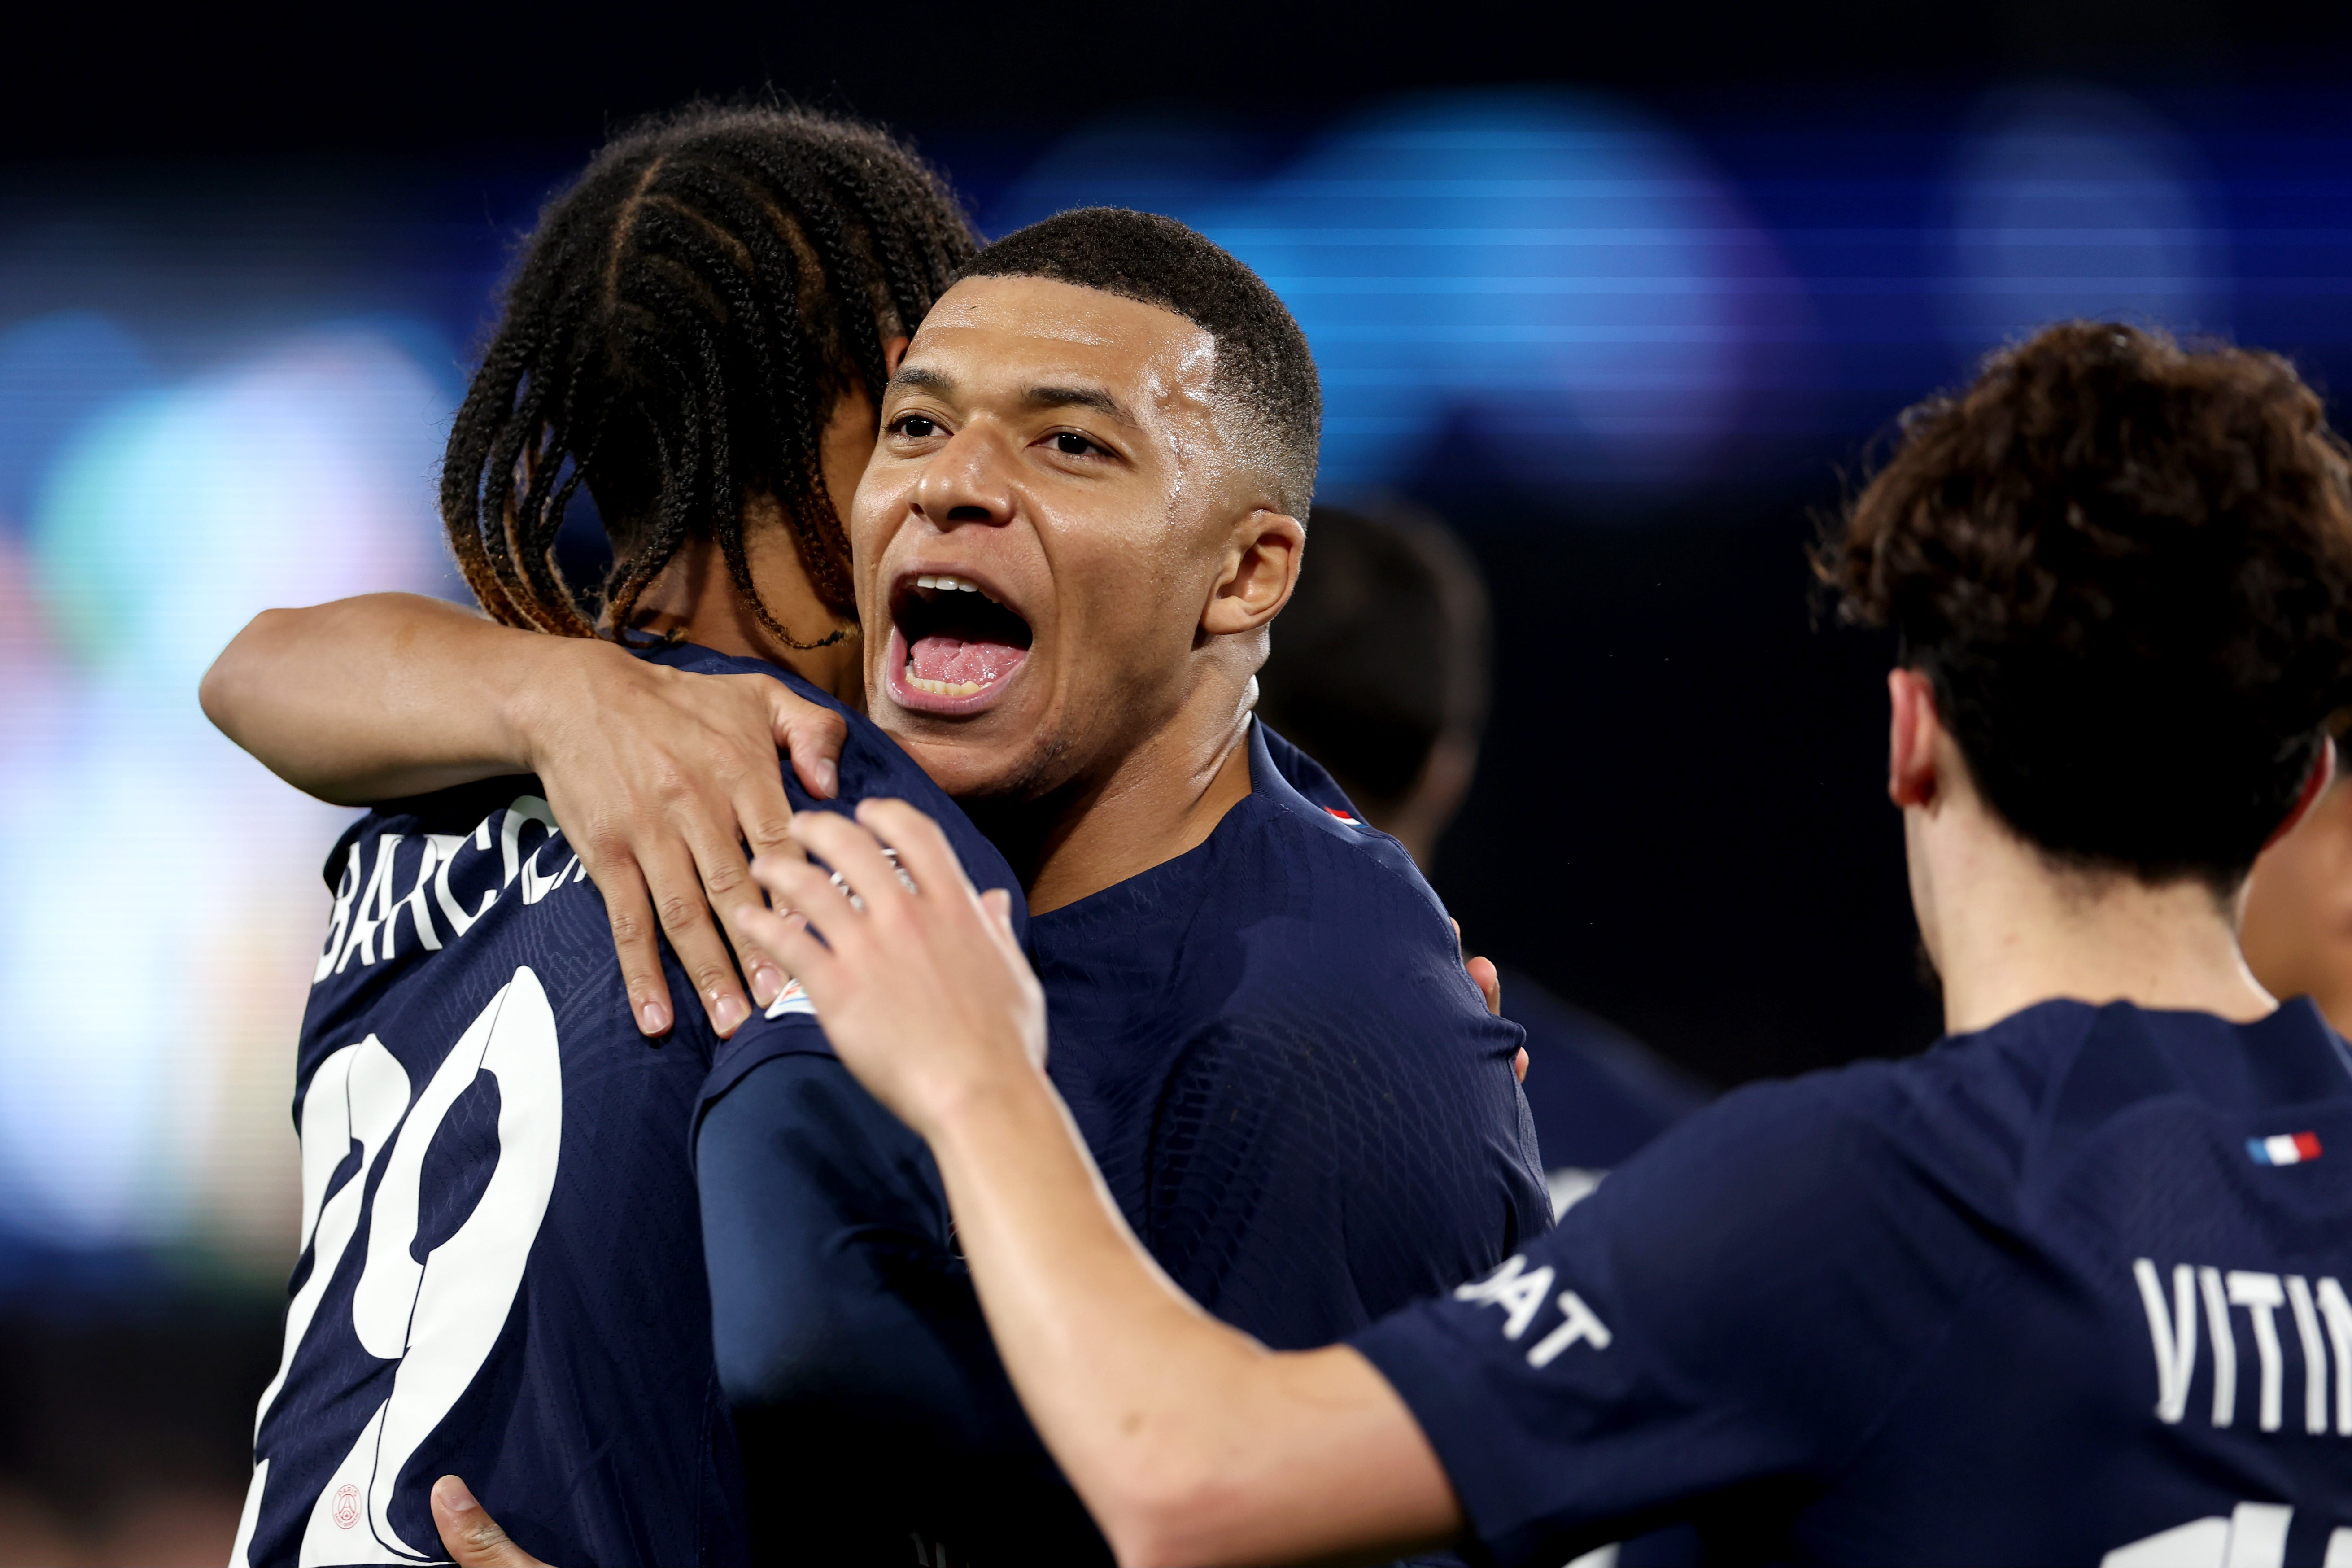 Kylian Mbappe and Bradley Barcola scored as PSG earned a 2-0 lead over Real Sociedad